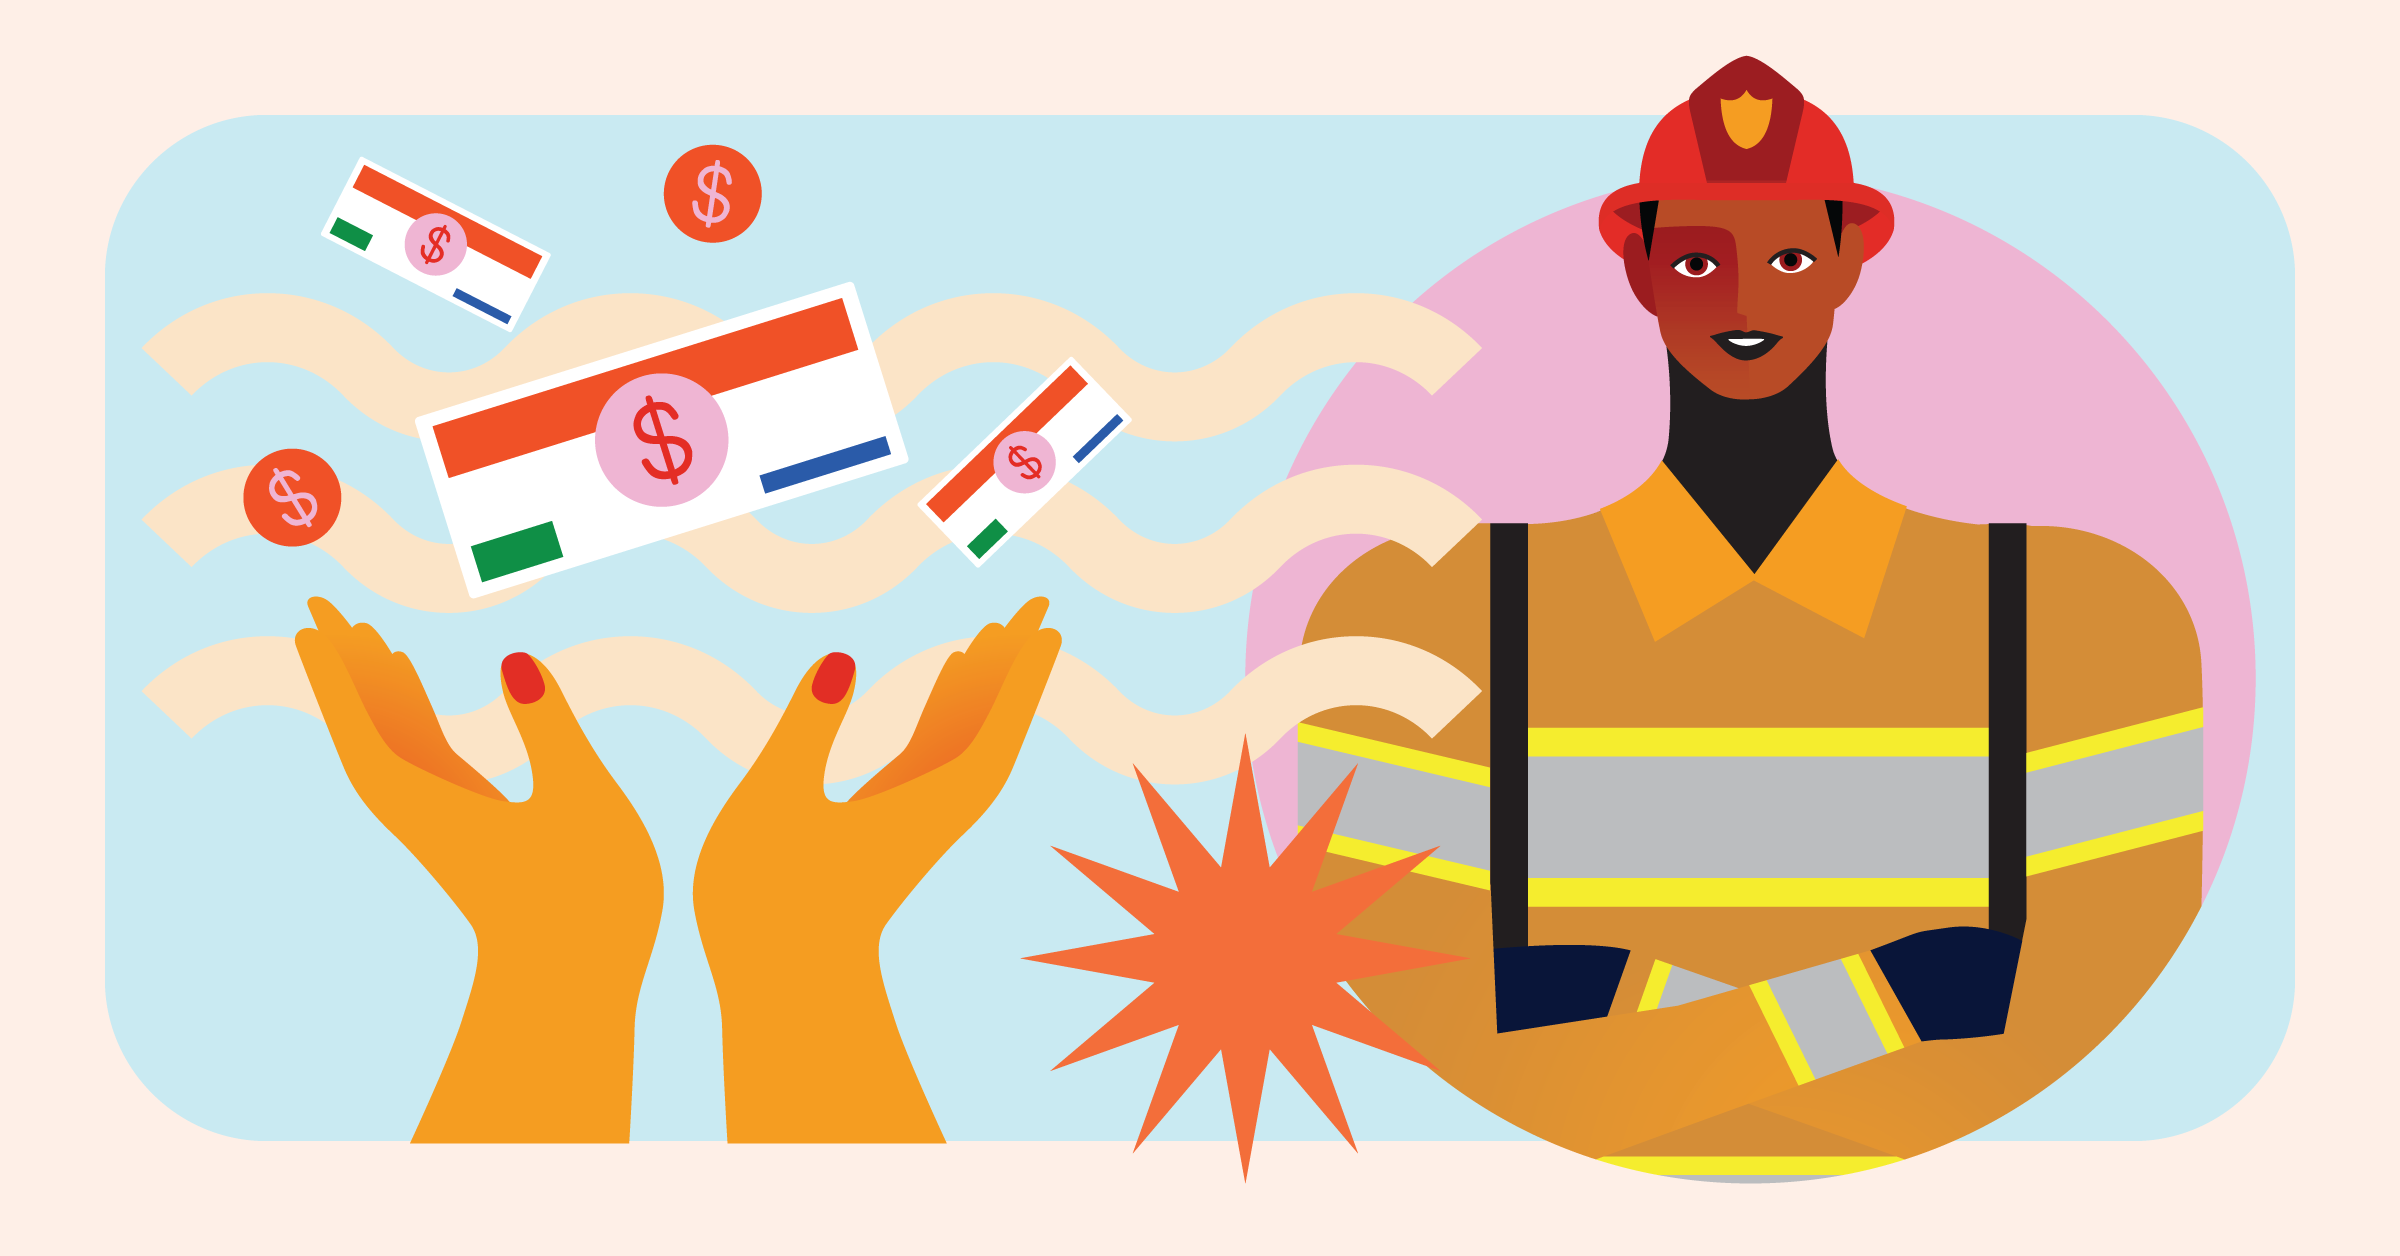 Illustration of a firefighter with folded arms and a helmet, standing next to disembodied hands tossing banknotes and coins. The background is blue on the figure's side and light pink on the hands' side. There is a red starburst shape below the hands.